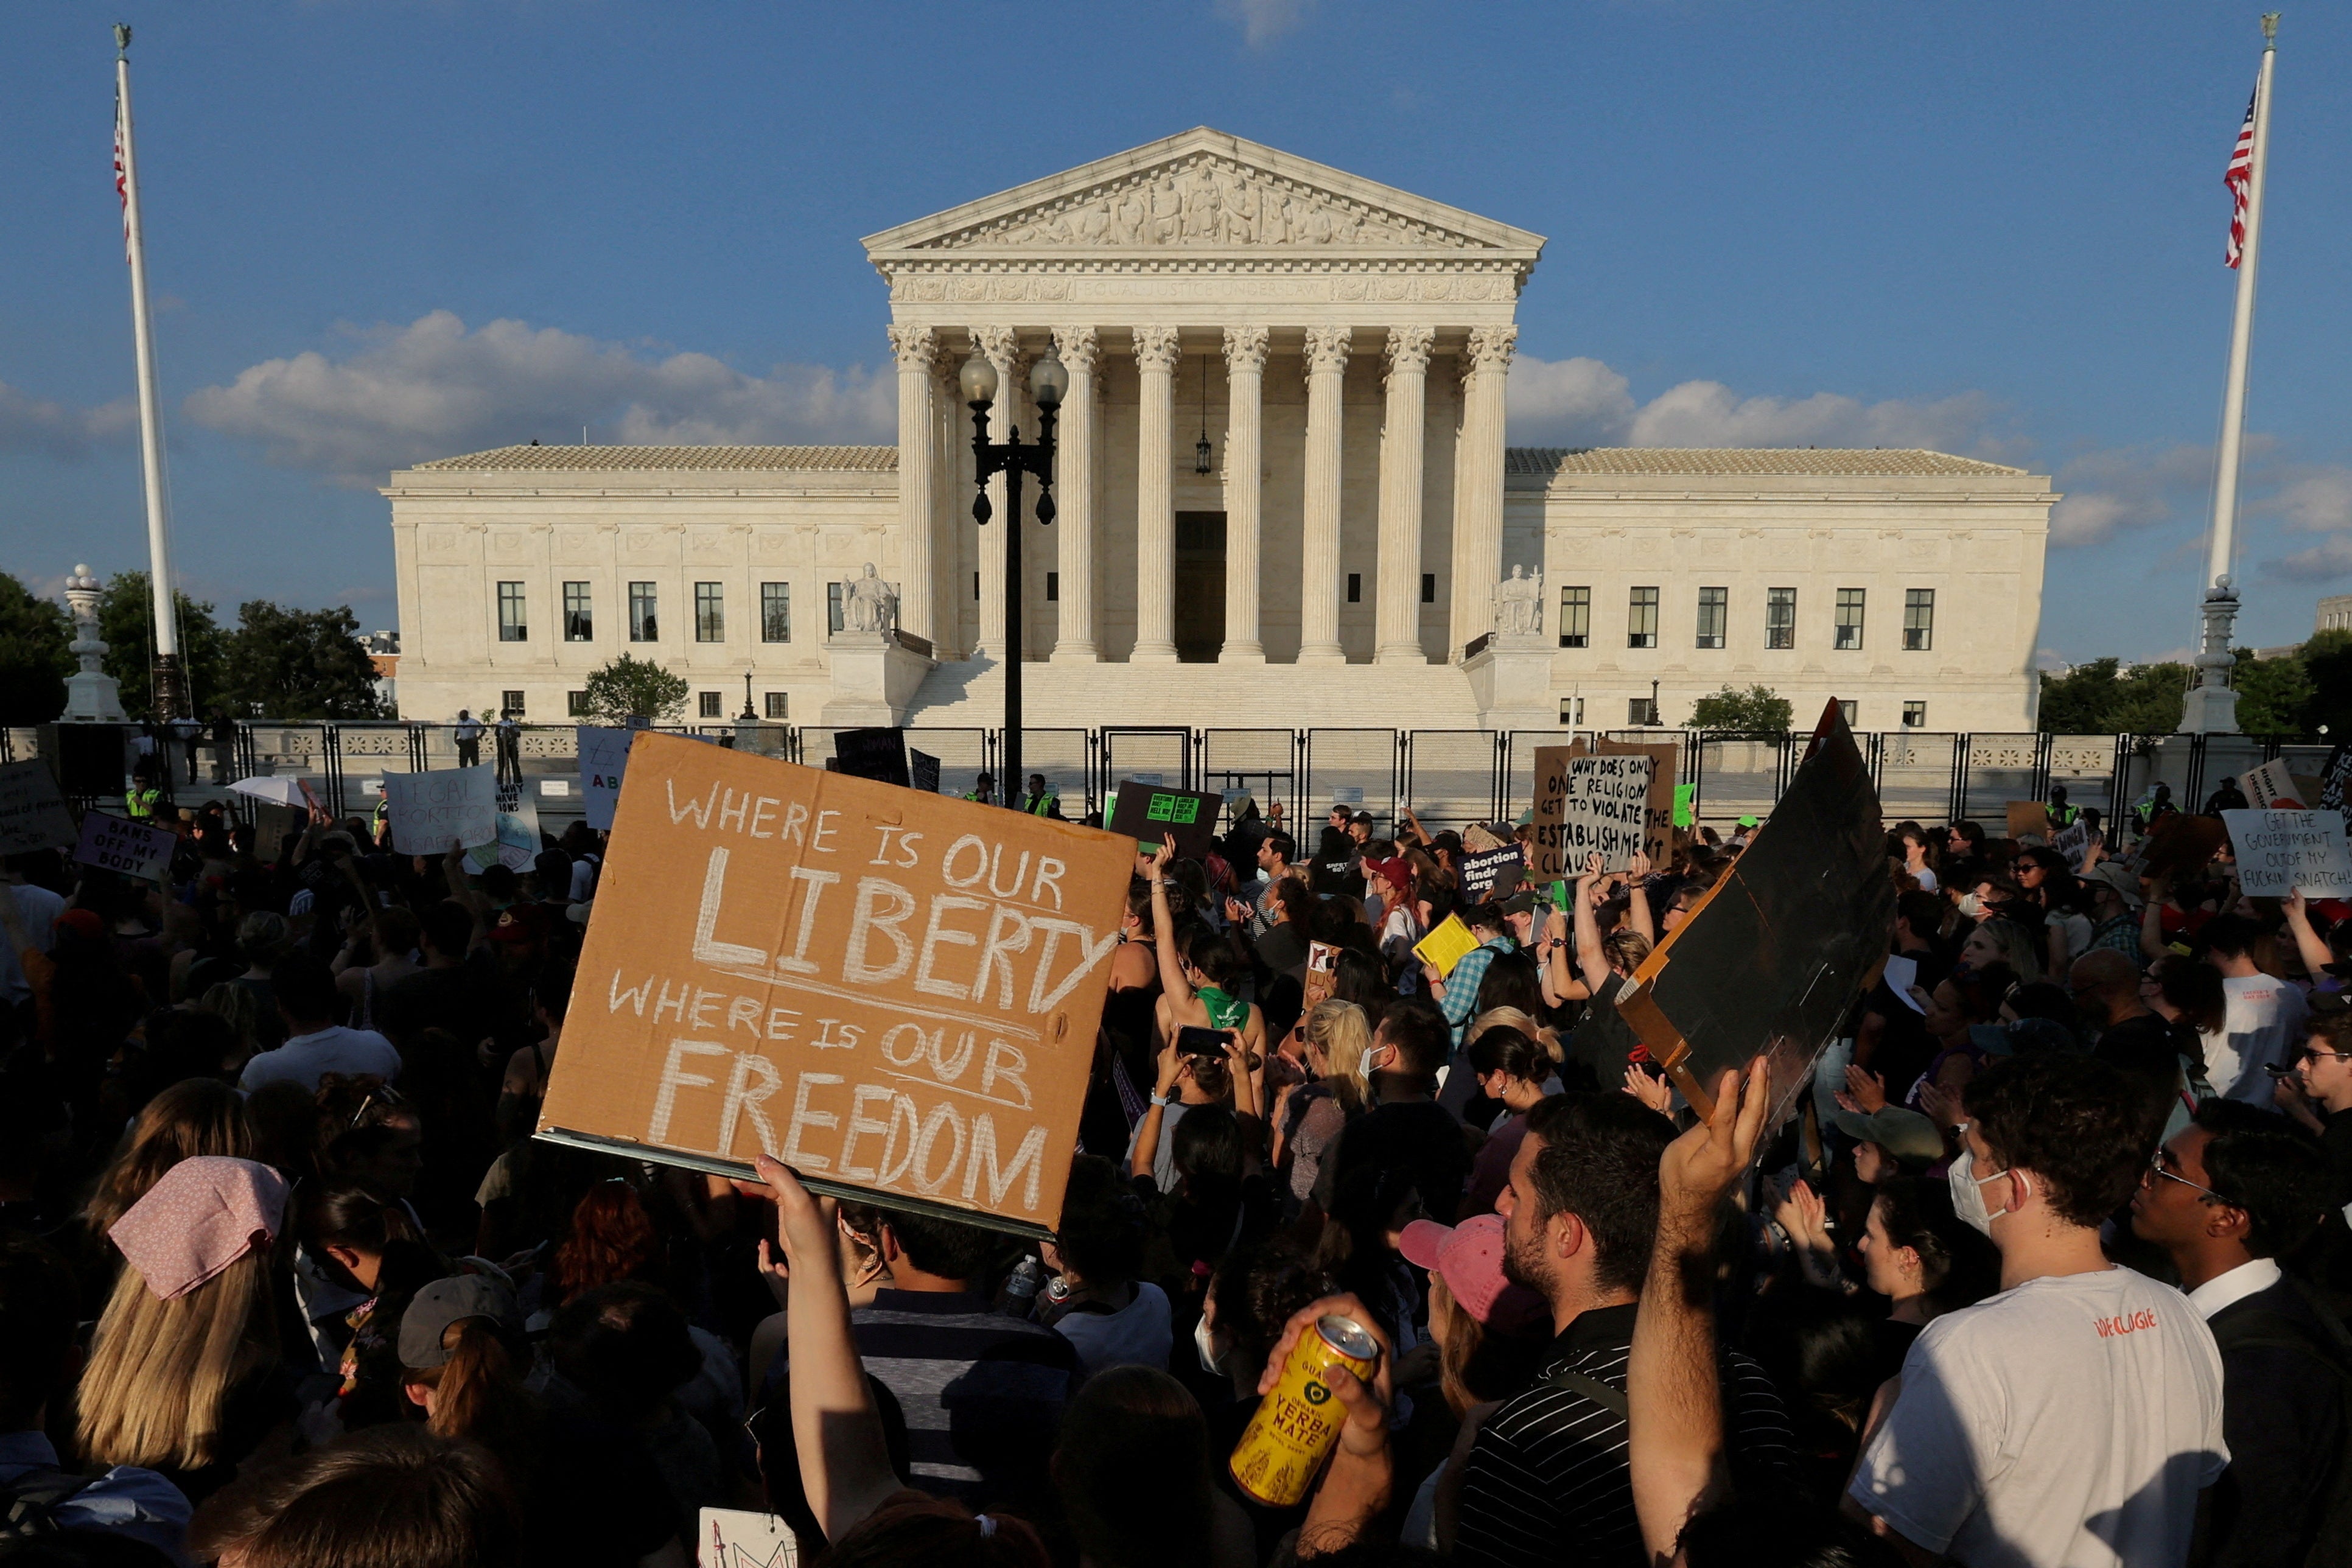 Protesters gather outside the fence around the Supreme Court building.